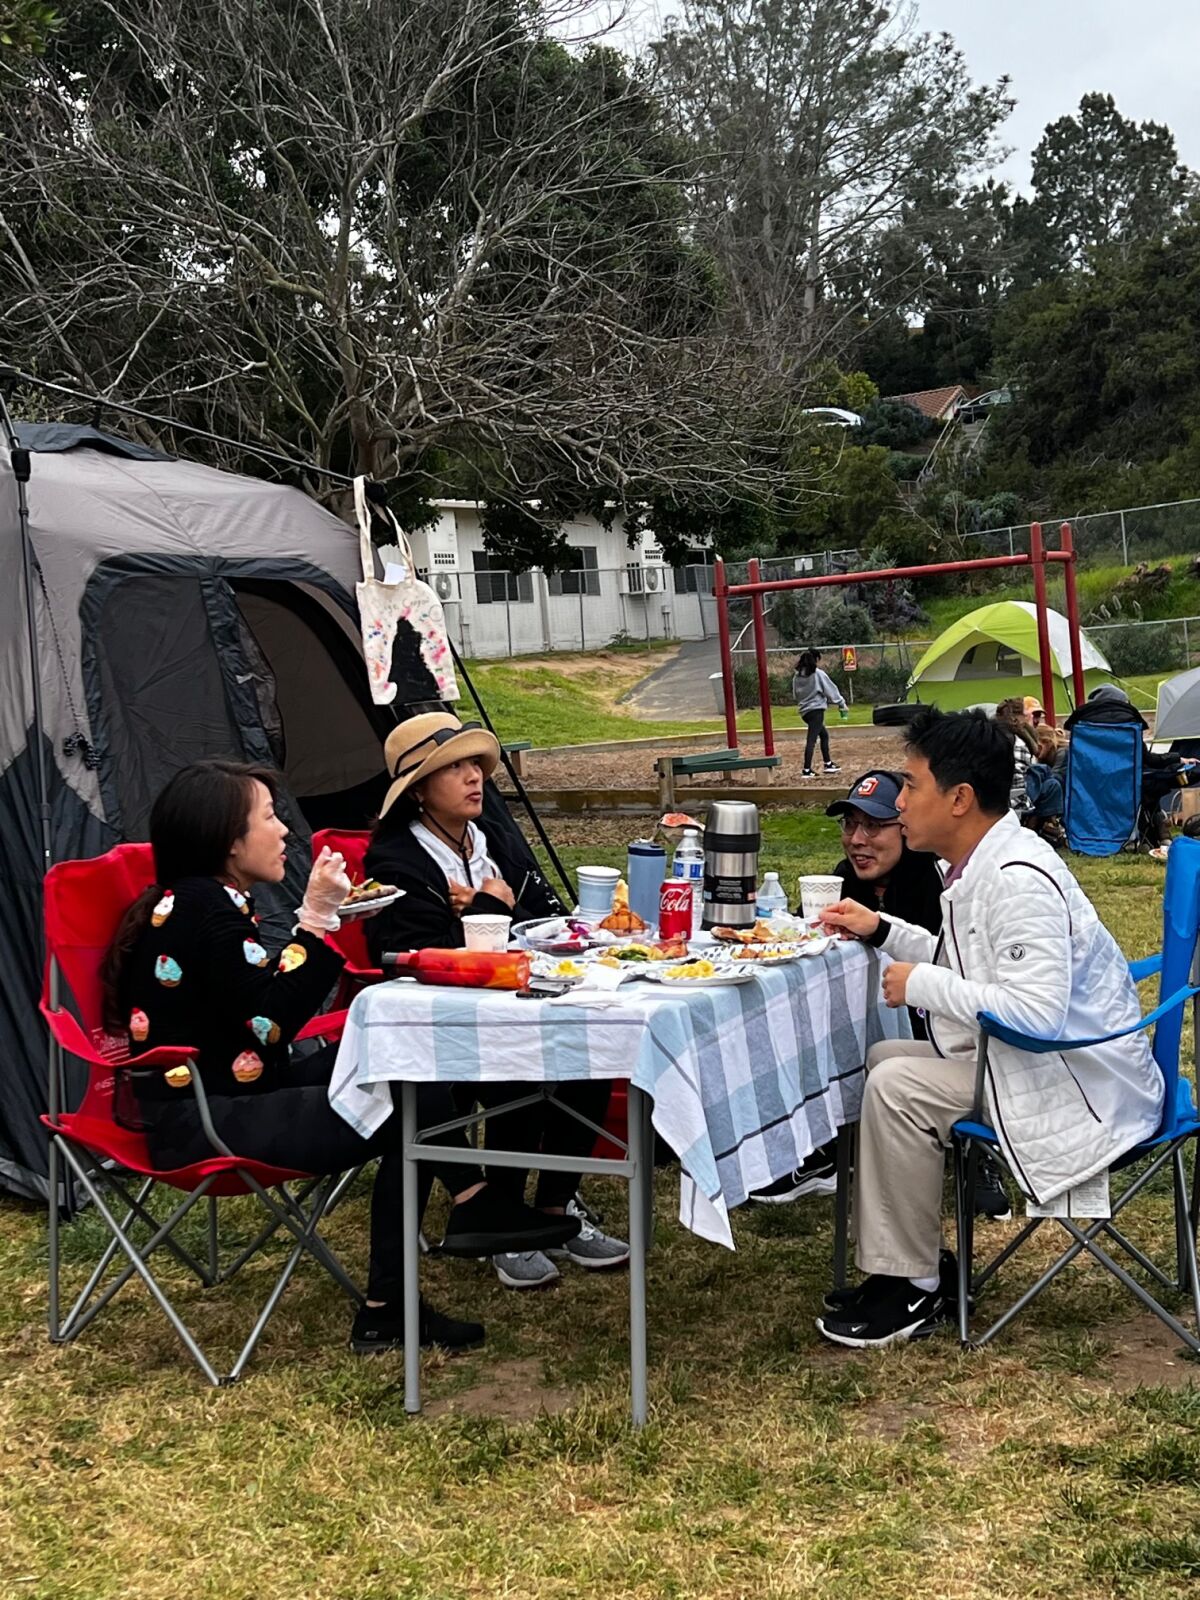 A family enjoys camping out.